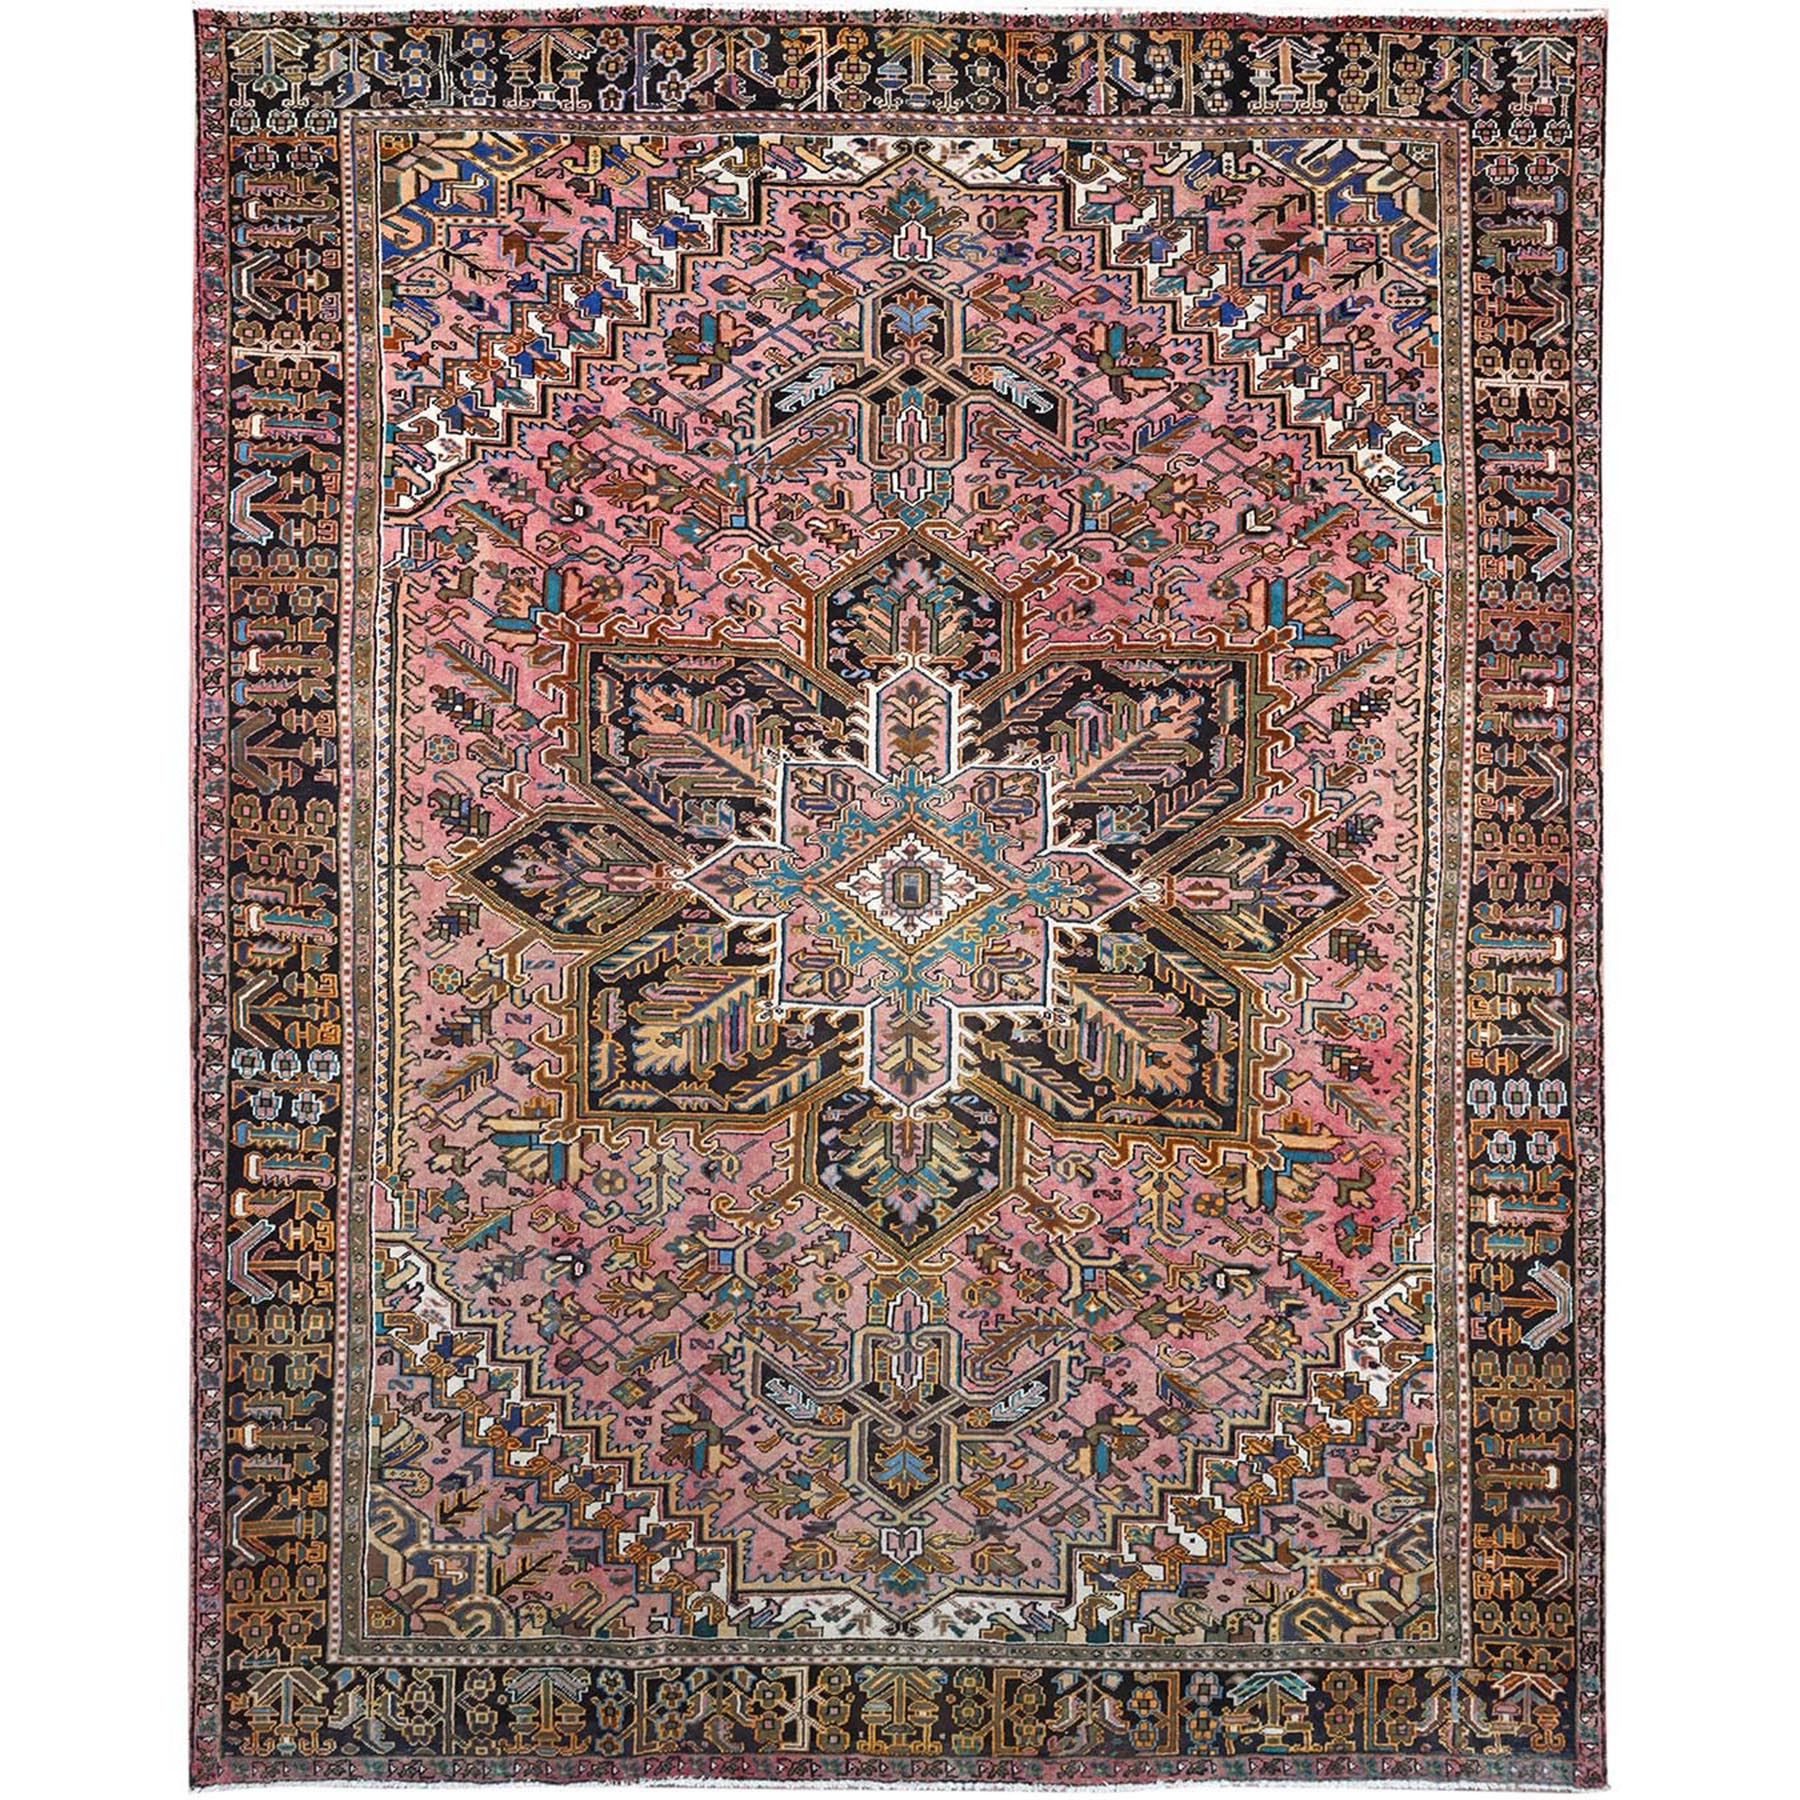 Wasabi Handloom Carpet from Bhadohi with Knotted Persian Design